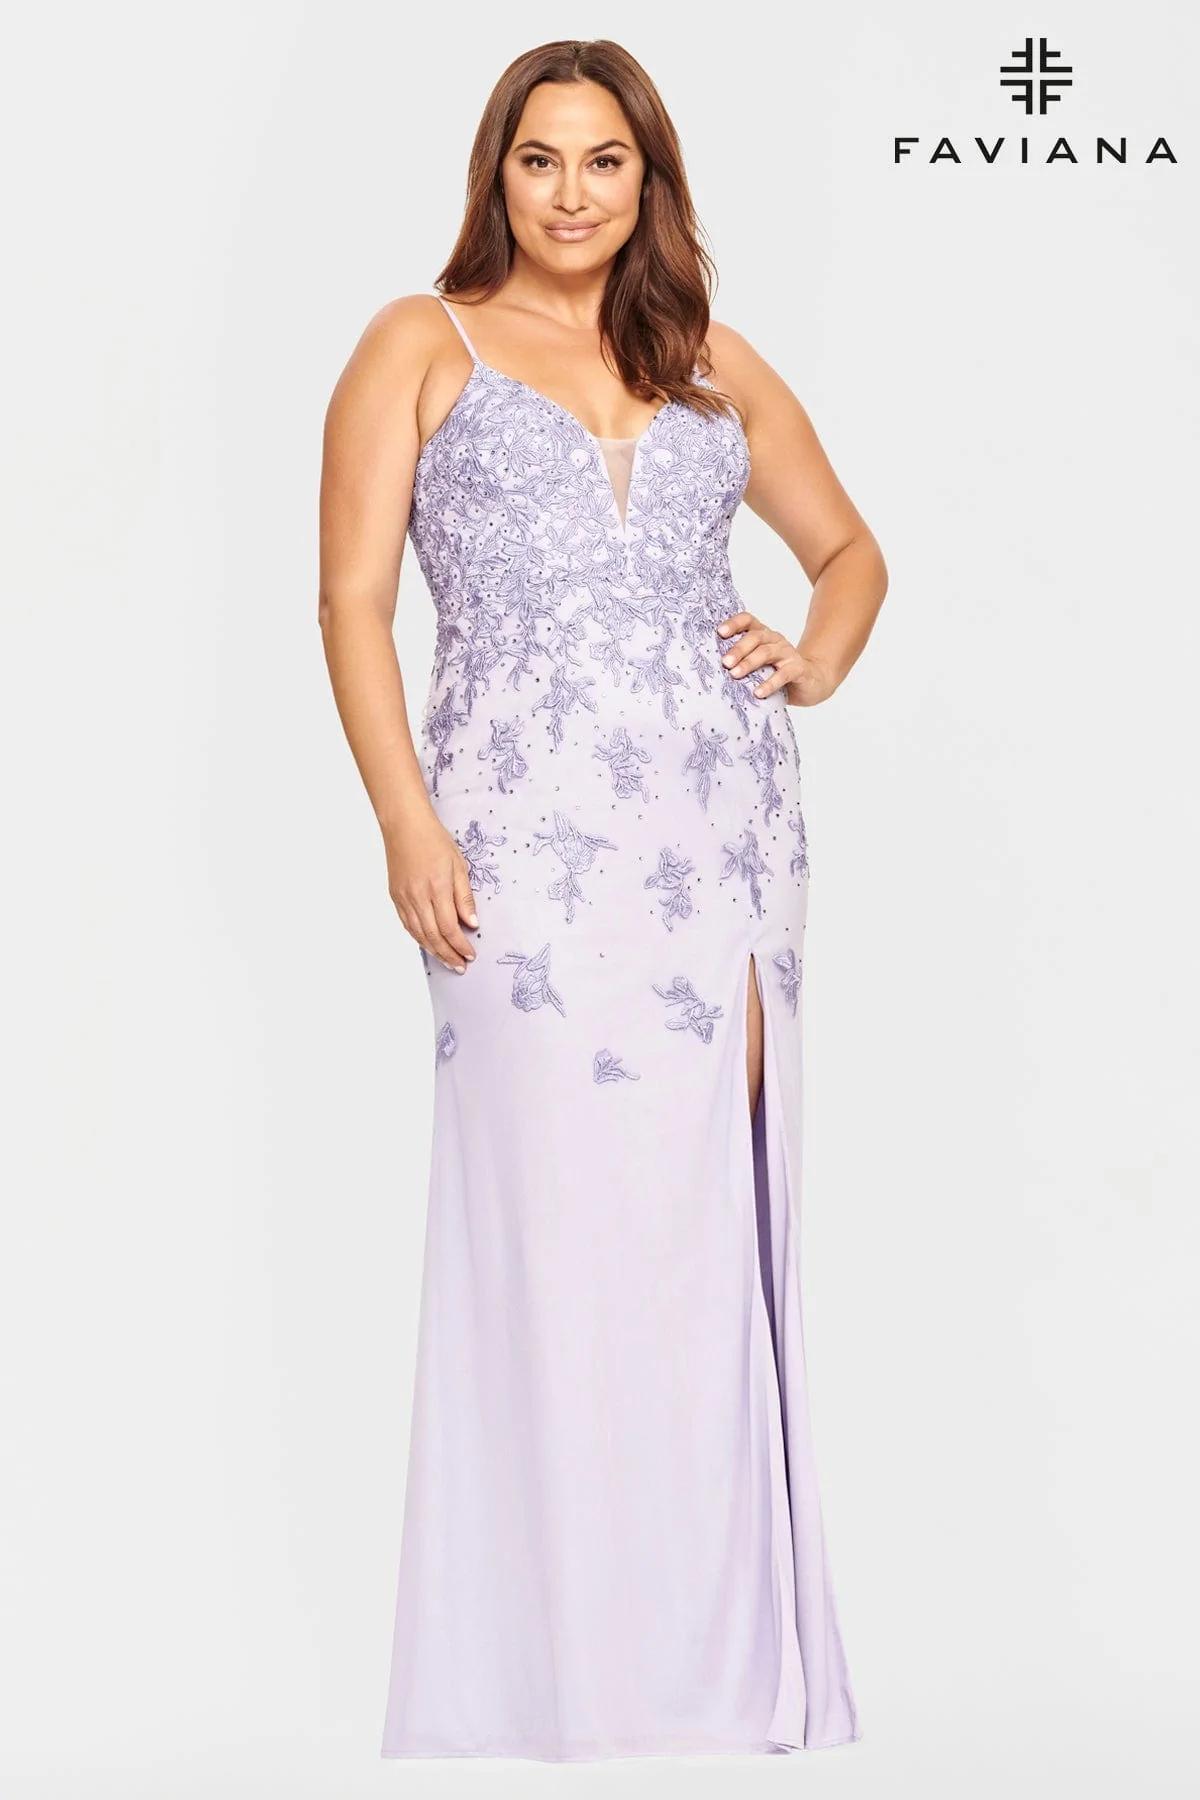 Plus sized prom dress in lavender with spaghetti straps, v-neck beaded lace applique, split skirt, available in multiple colors for prom 2023